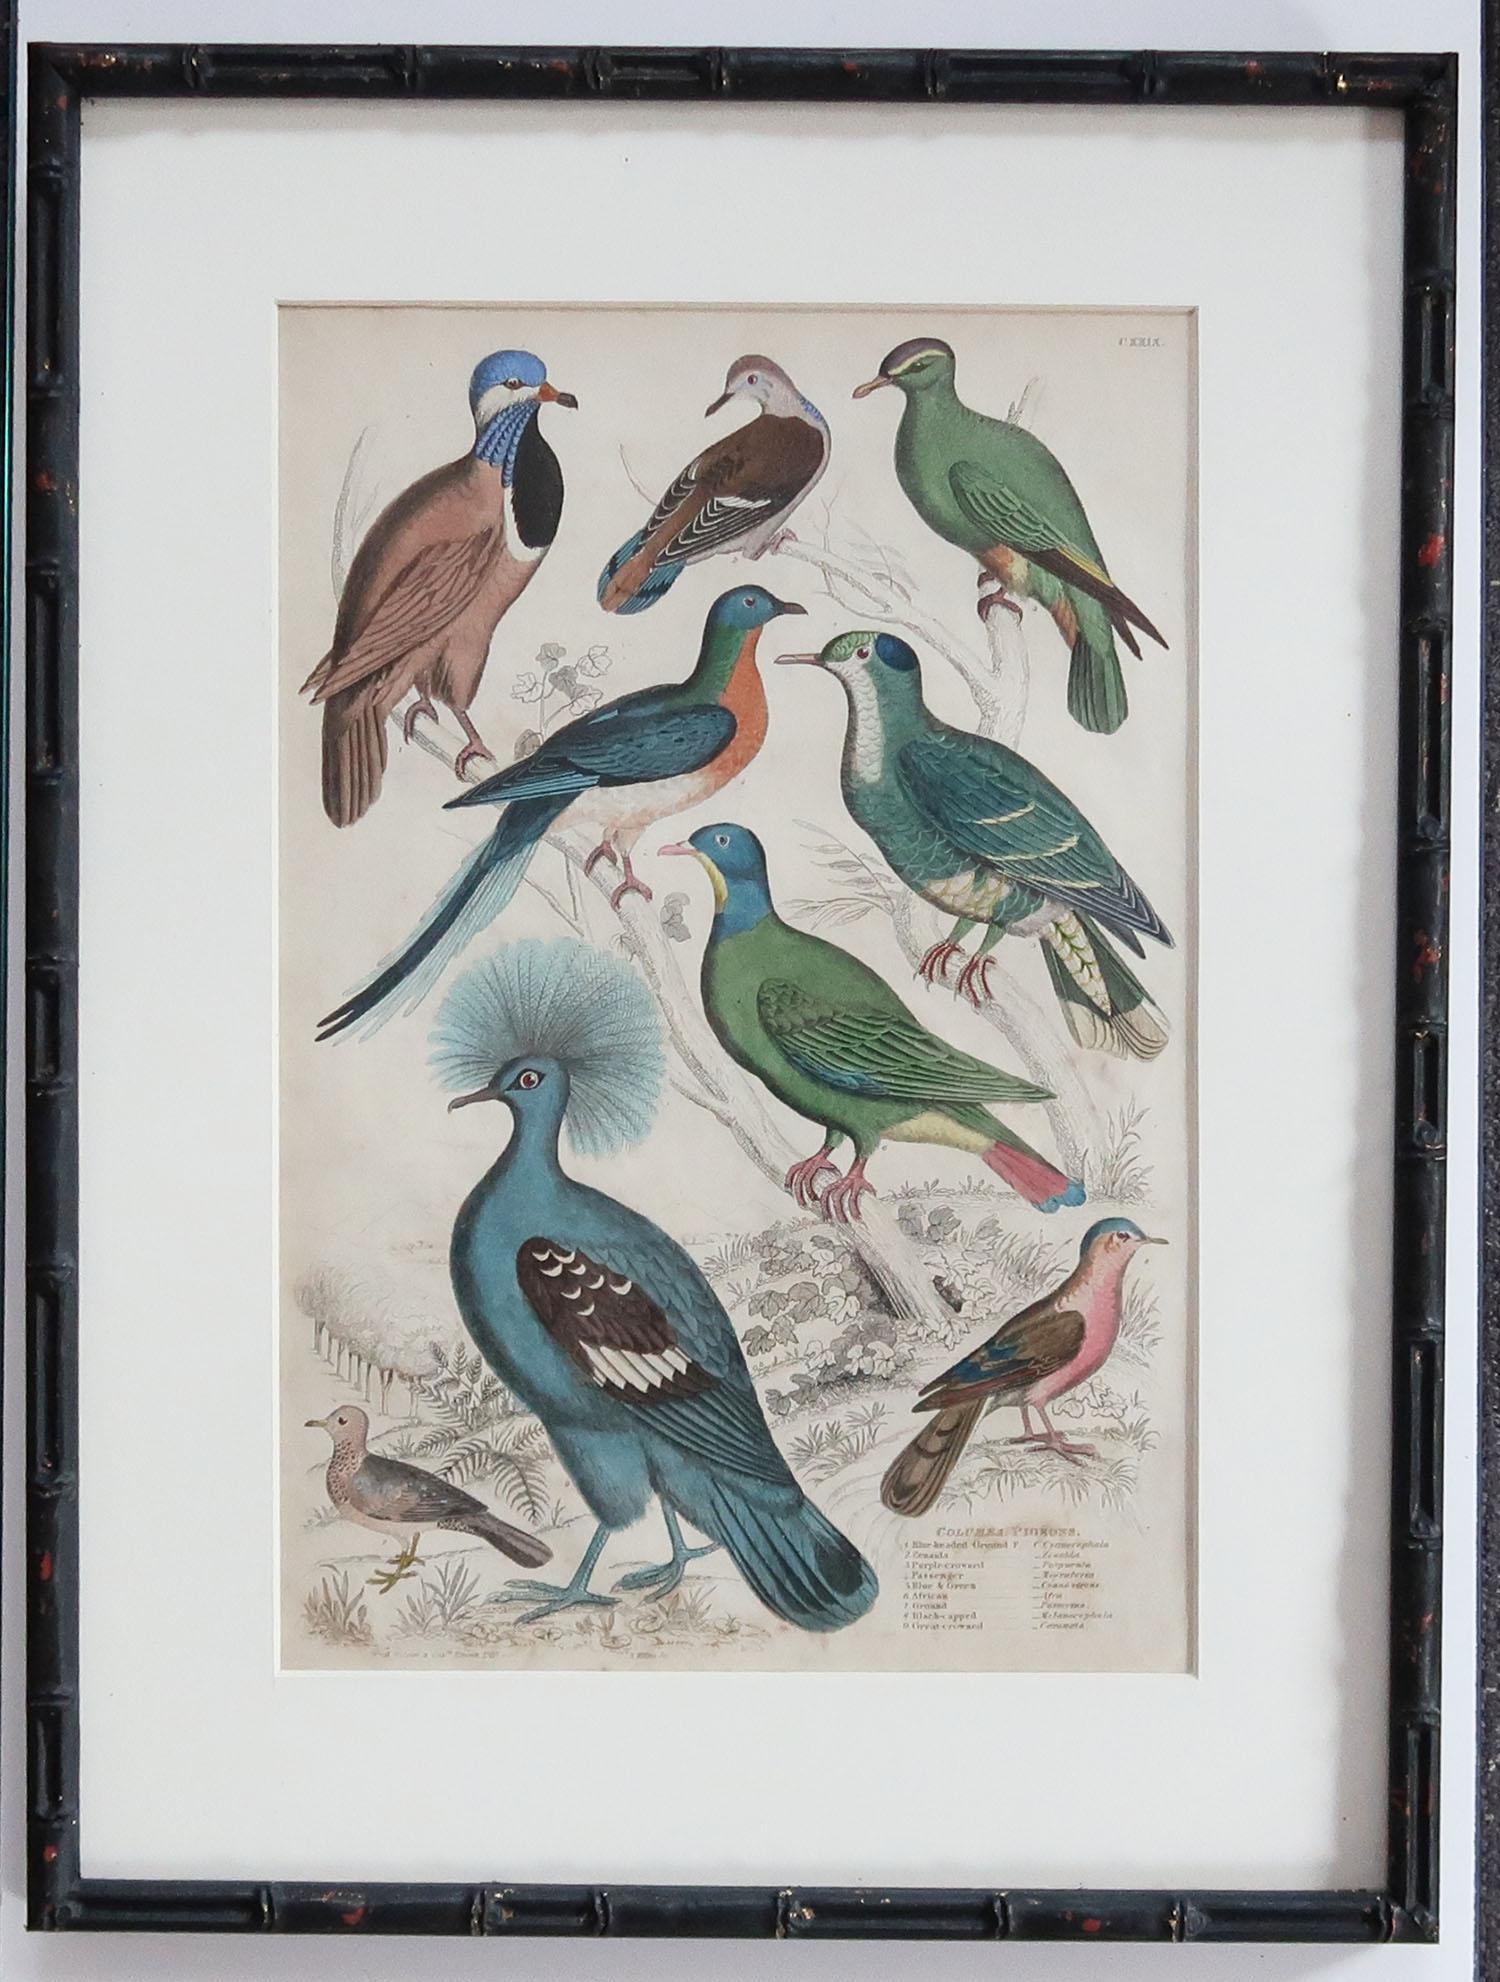 Wonderful set of 10 antique bird prints in exquisite bright original colours.

Presented in our own custom made ebonized faux bamboo frames.

Lithographs after the original drawings by Captain Brown. Original hand color.

Published